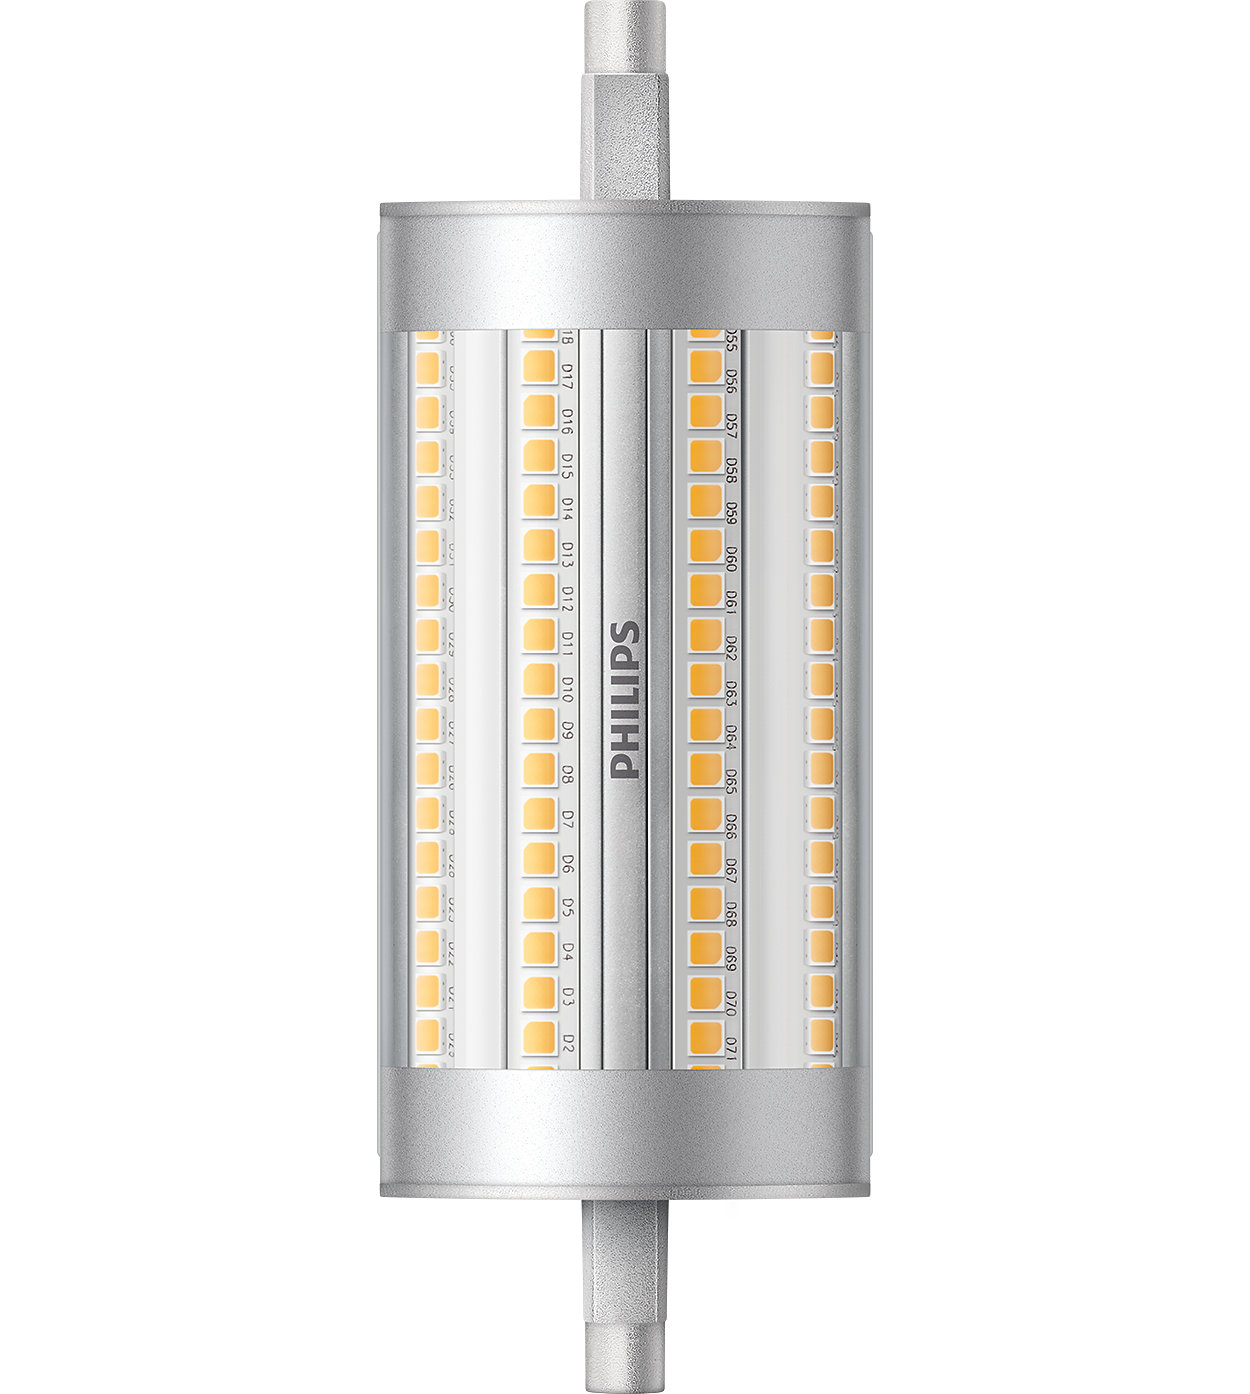 Dimmable linear LED light with a 300 degree beam